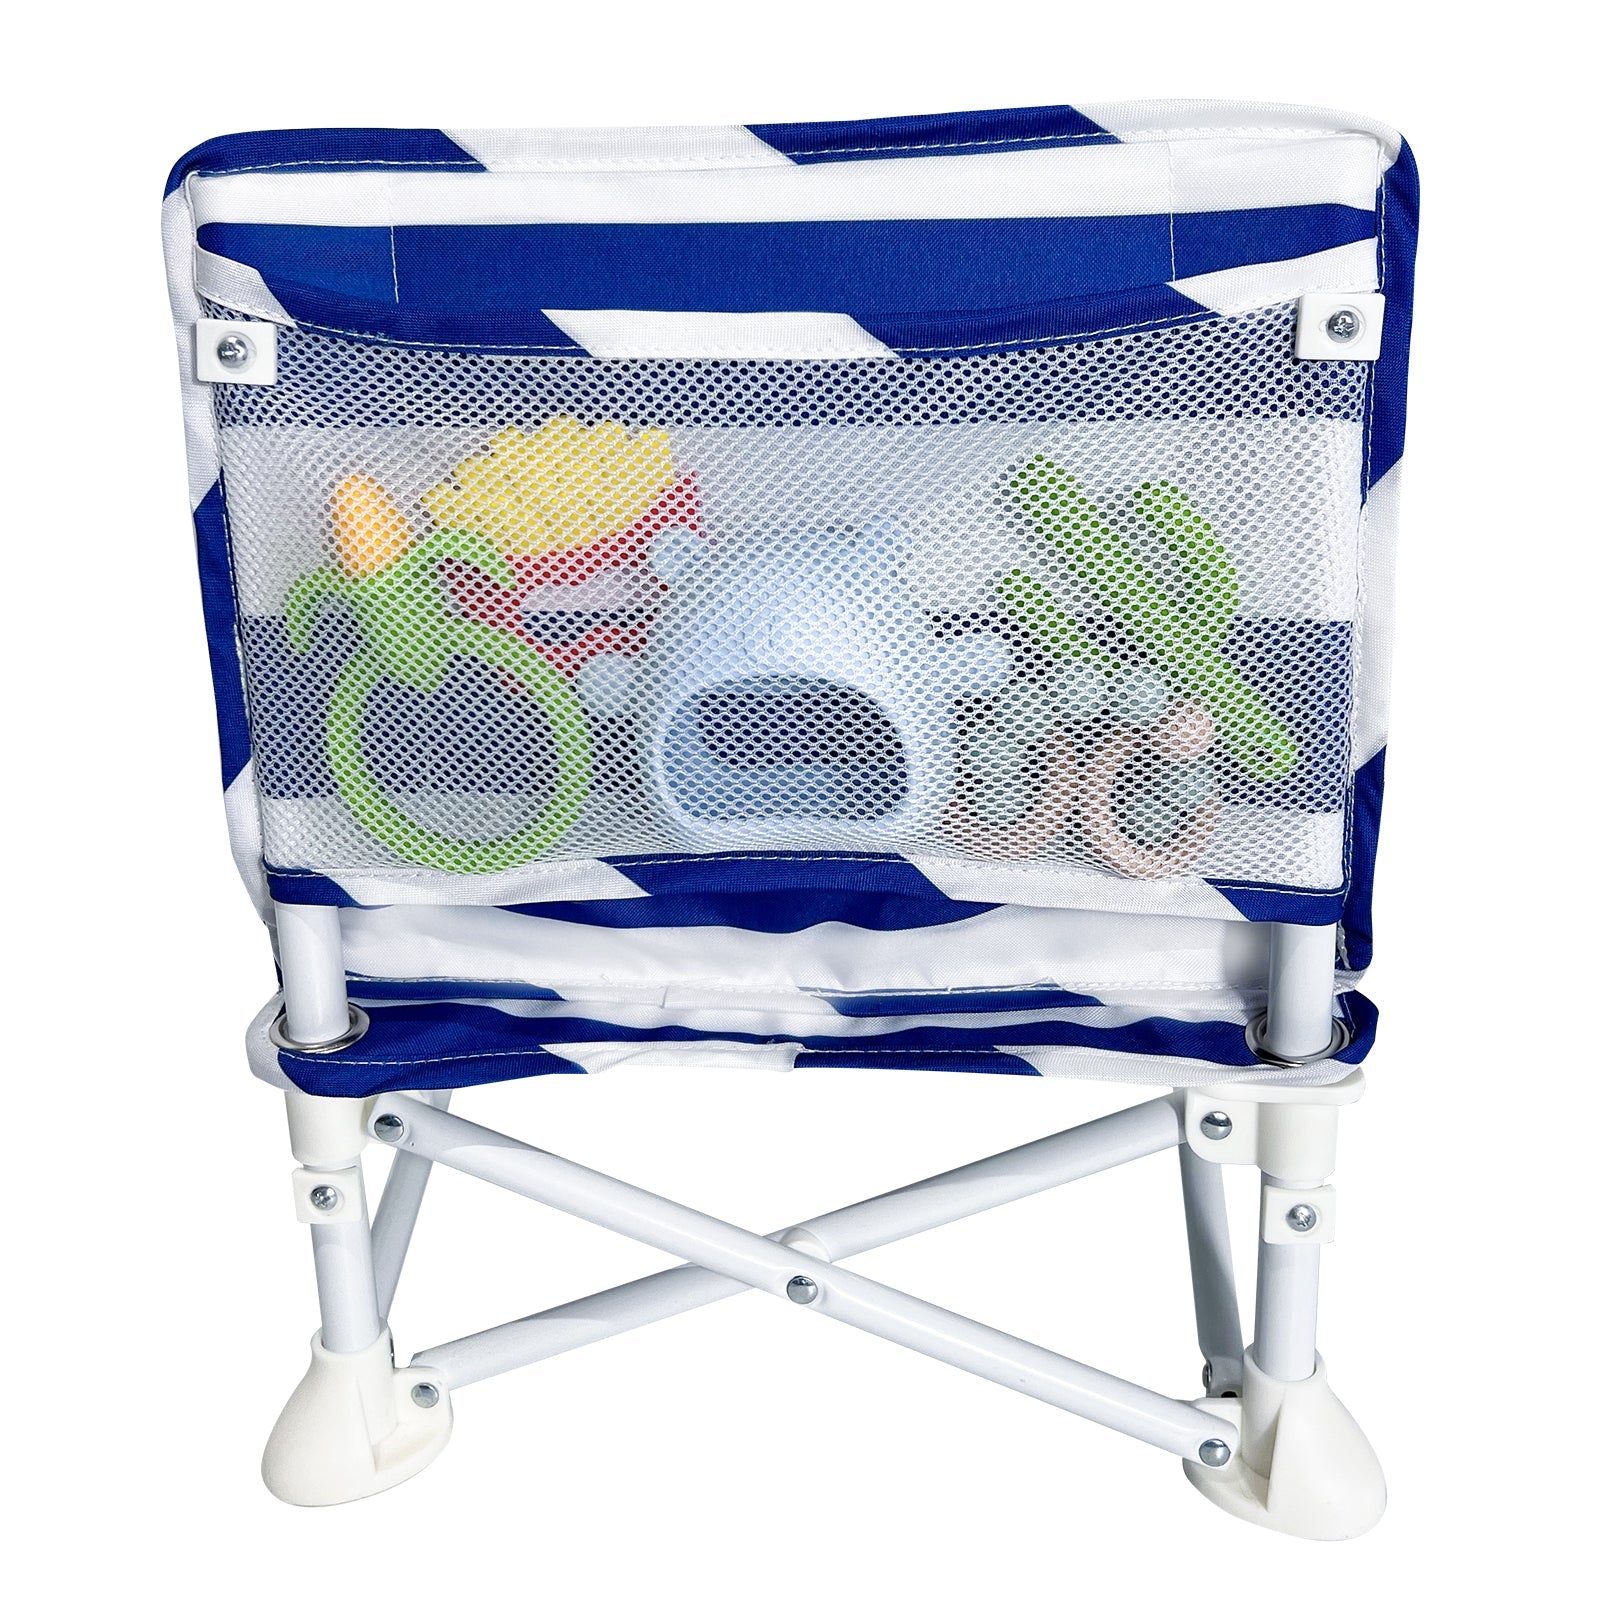 Travel Booster Seat with Tray for Baby, Booster Chair for Camping, Beach, with Carry Bag